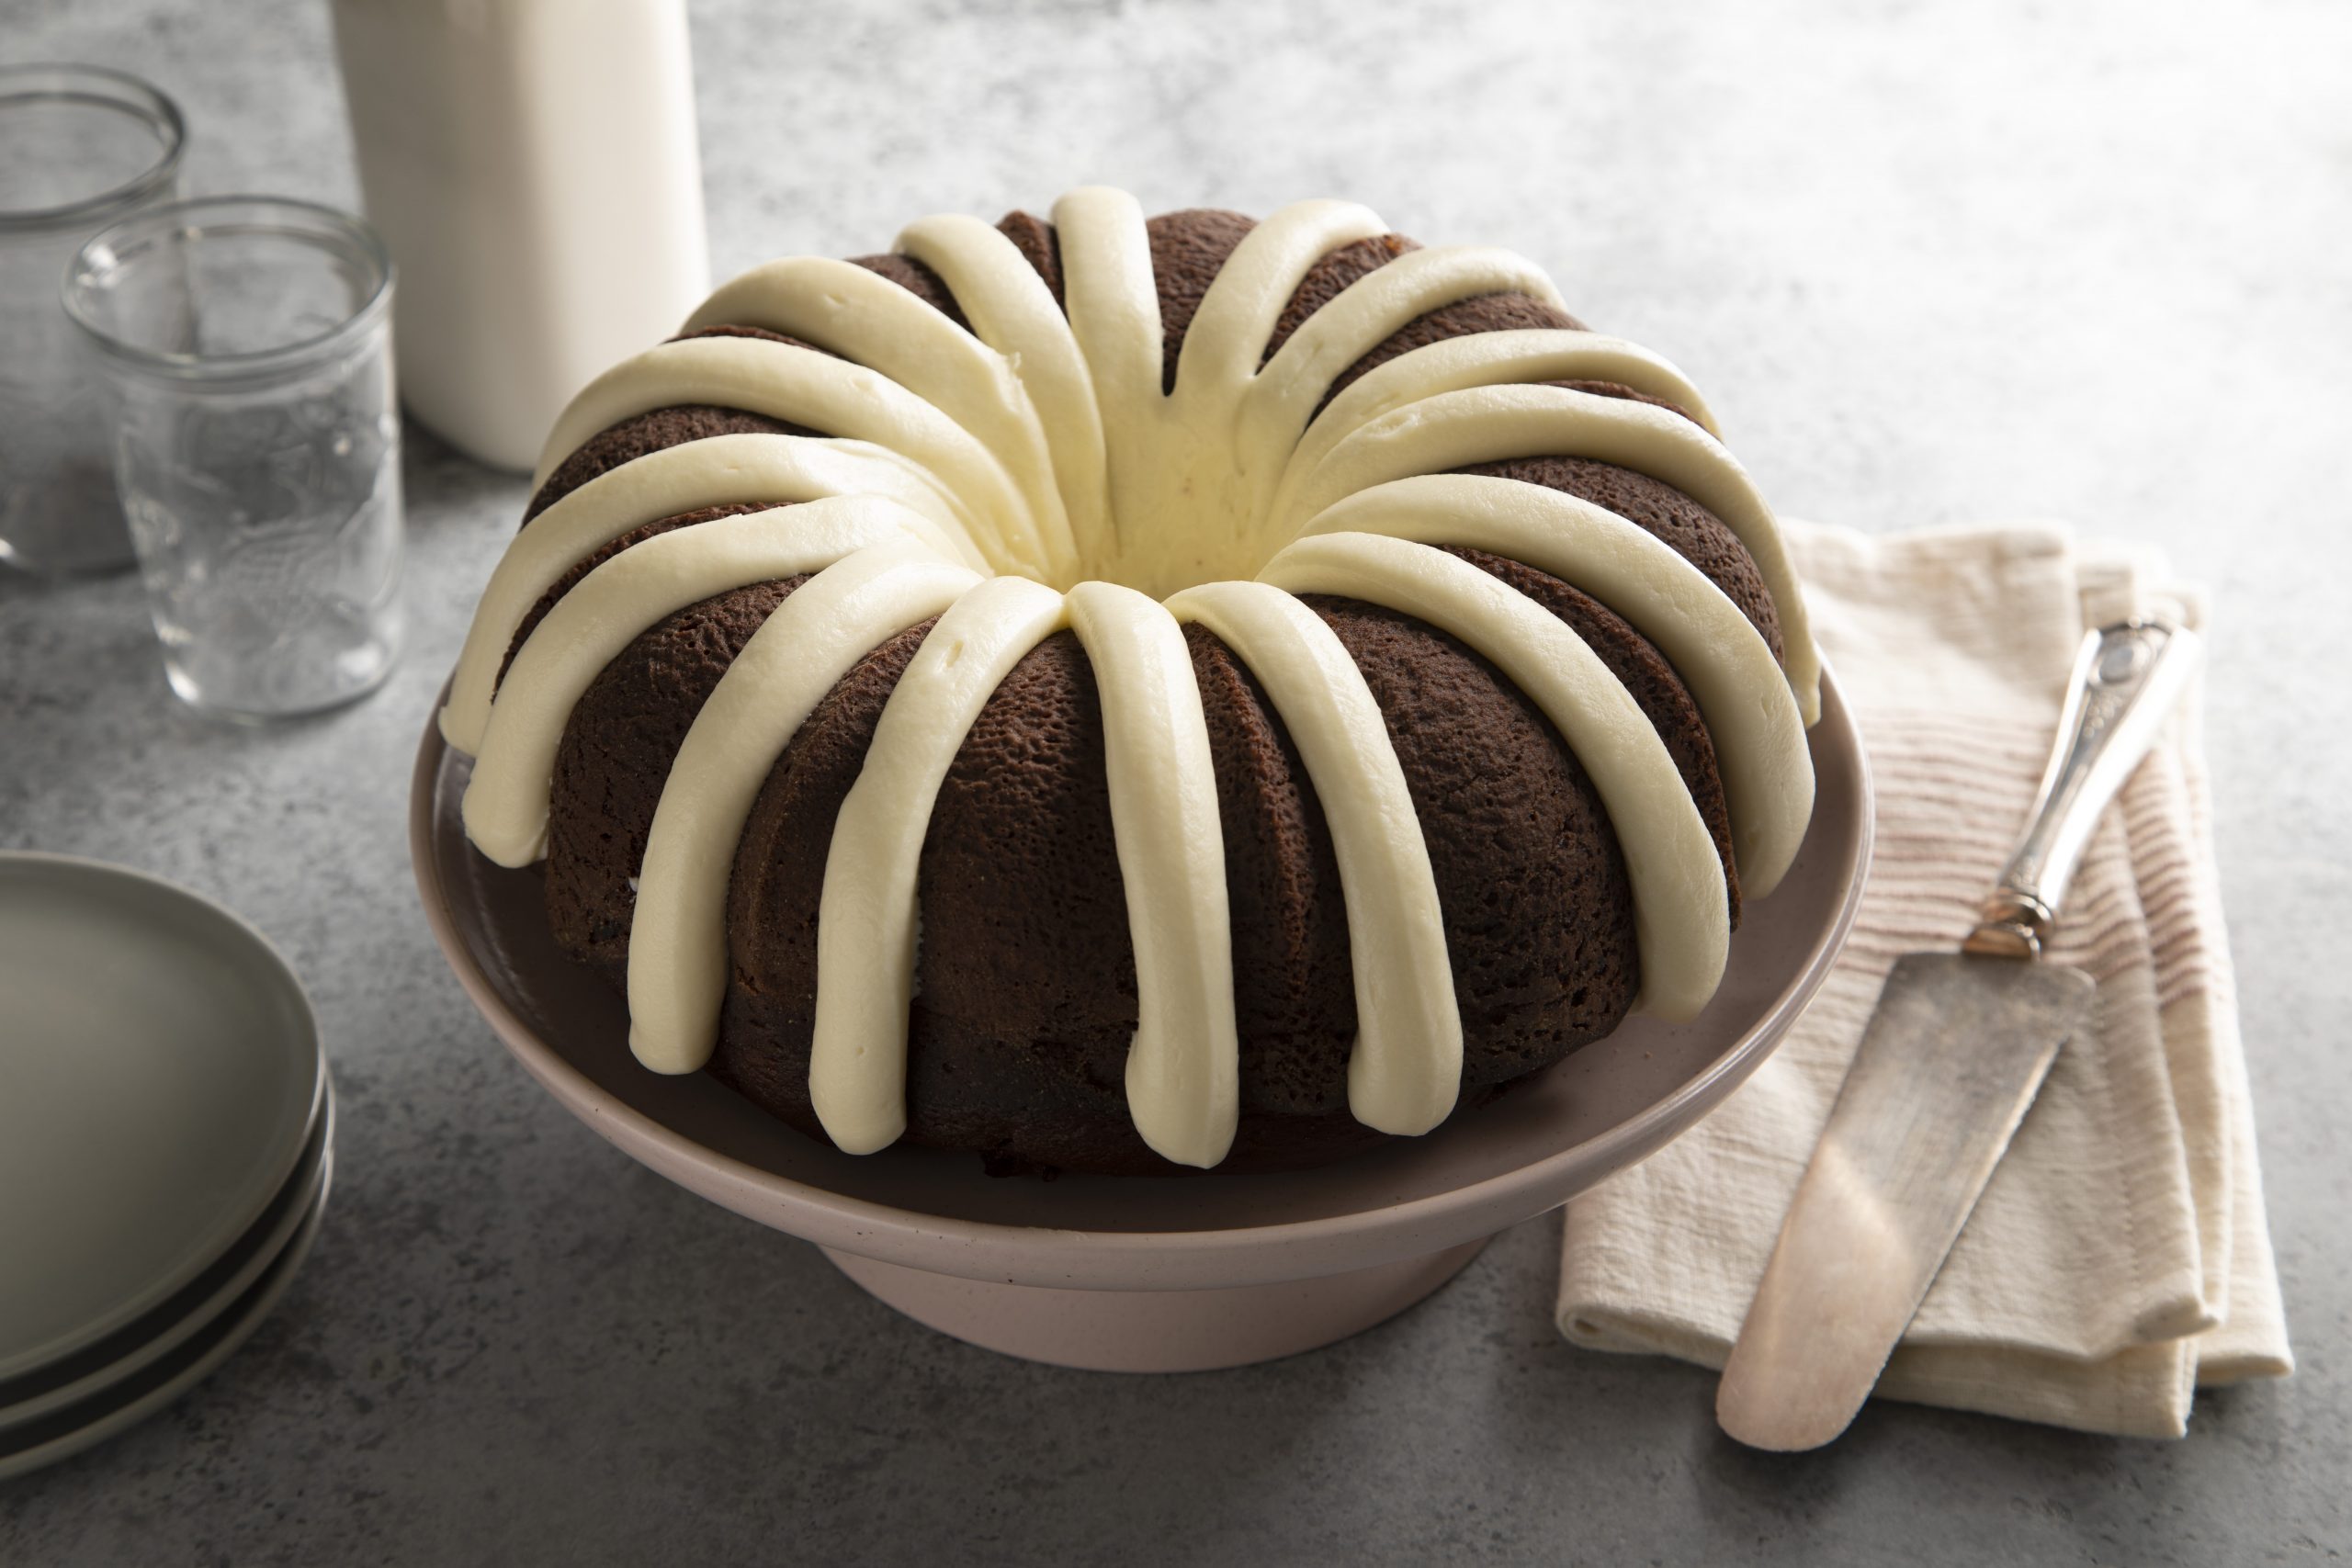 Nothing Bundt Cakes Now Offers Gluten-Free Cake